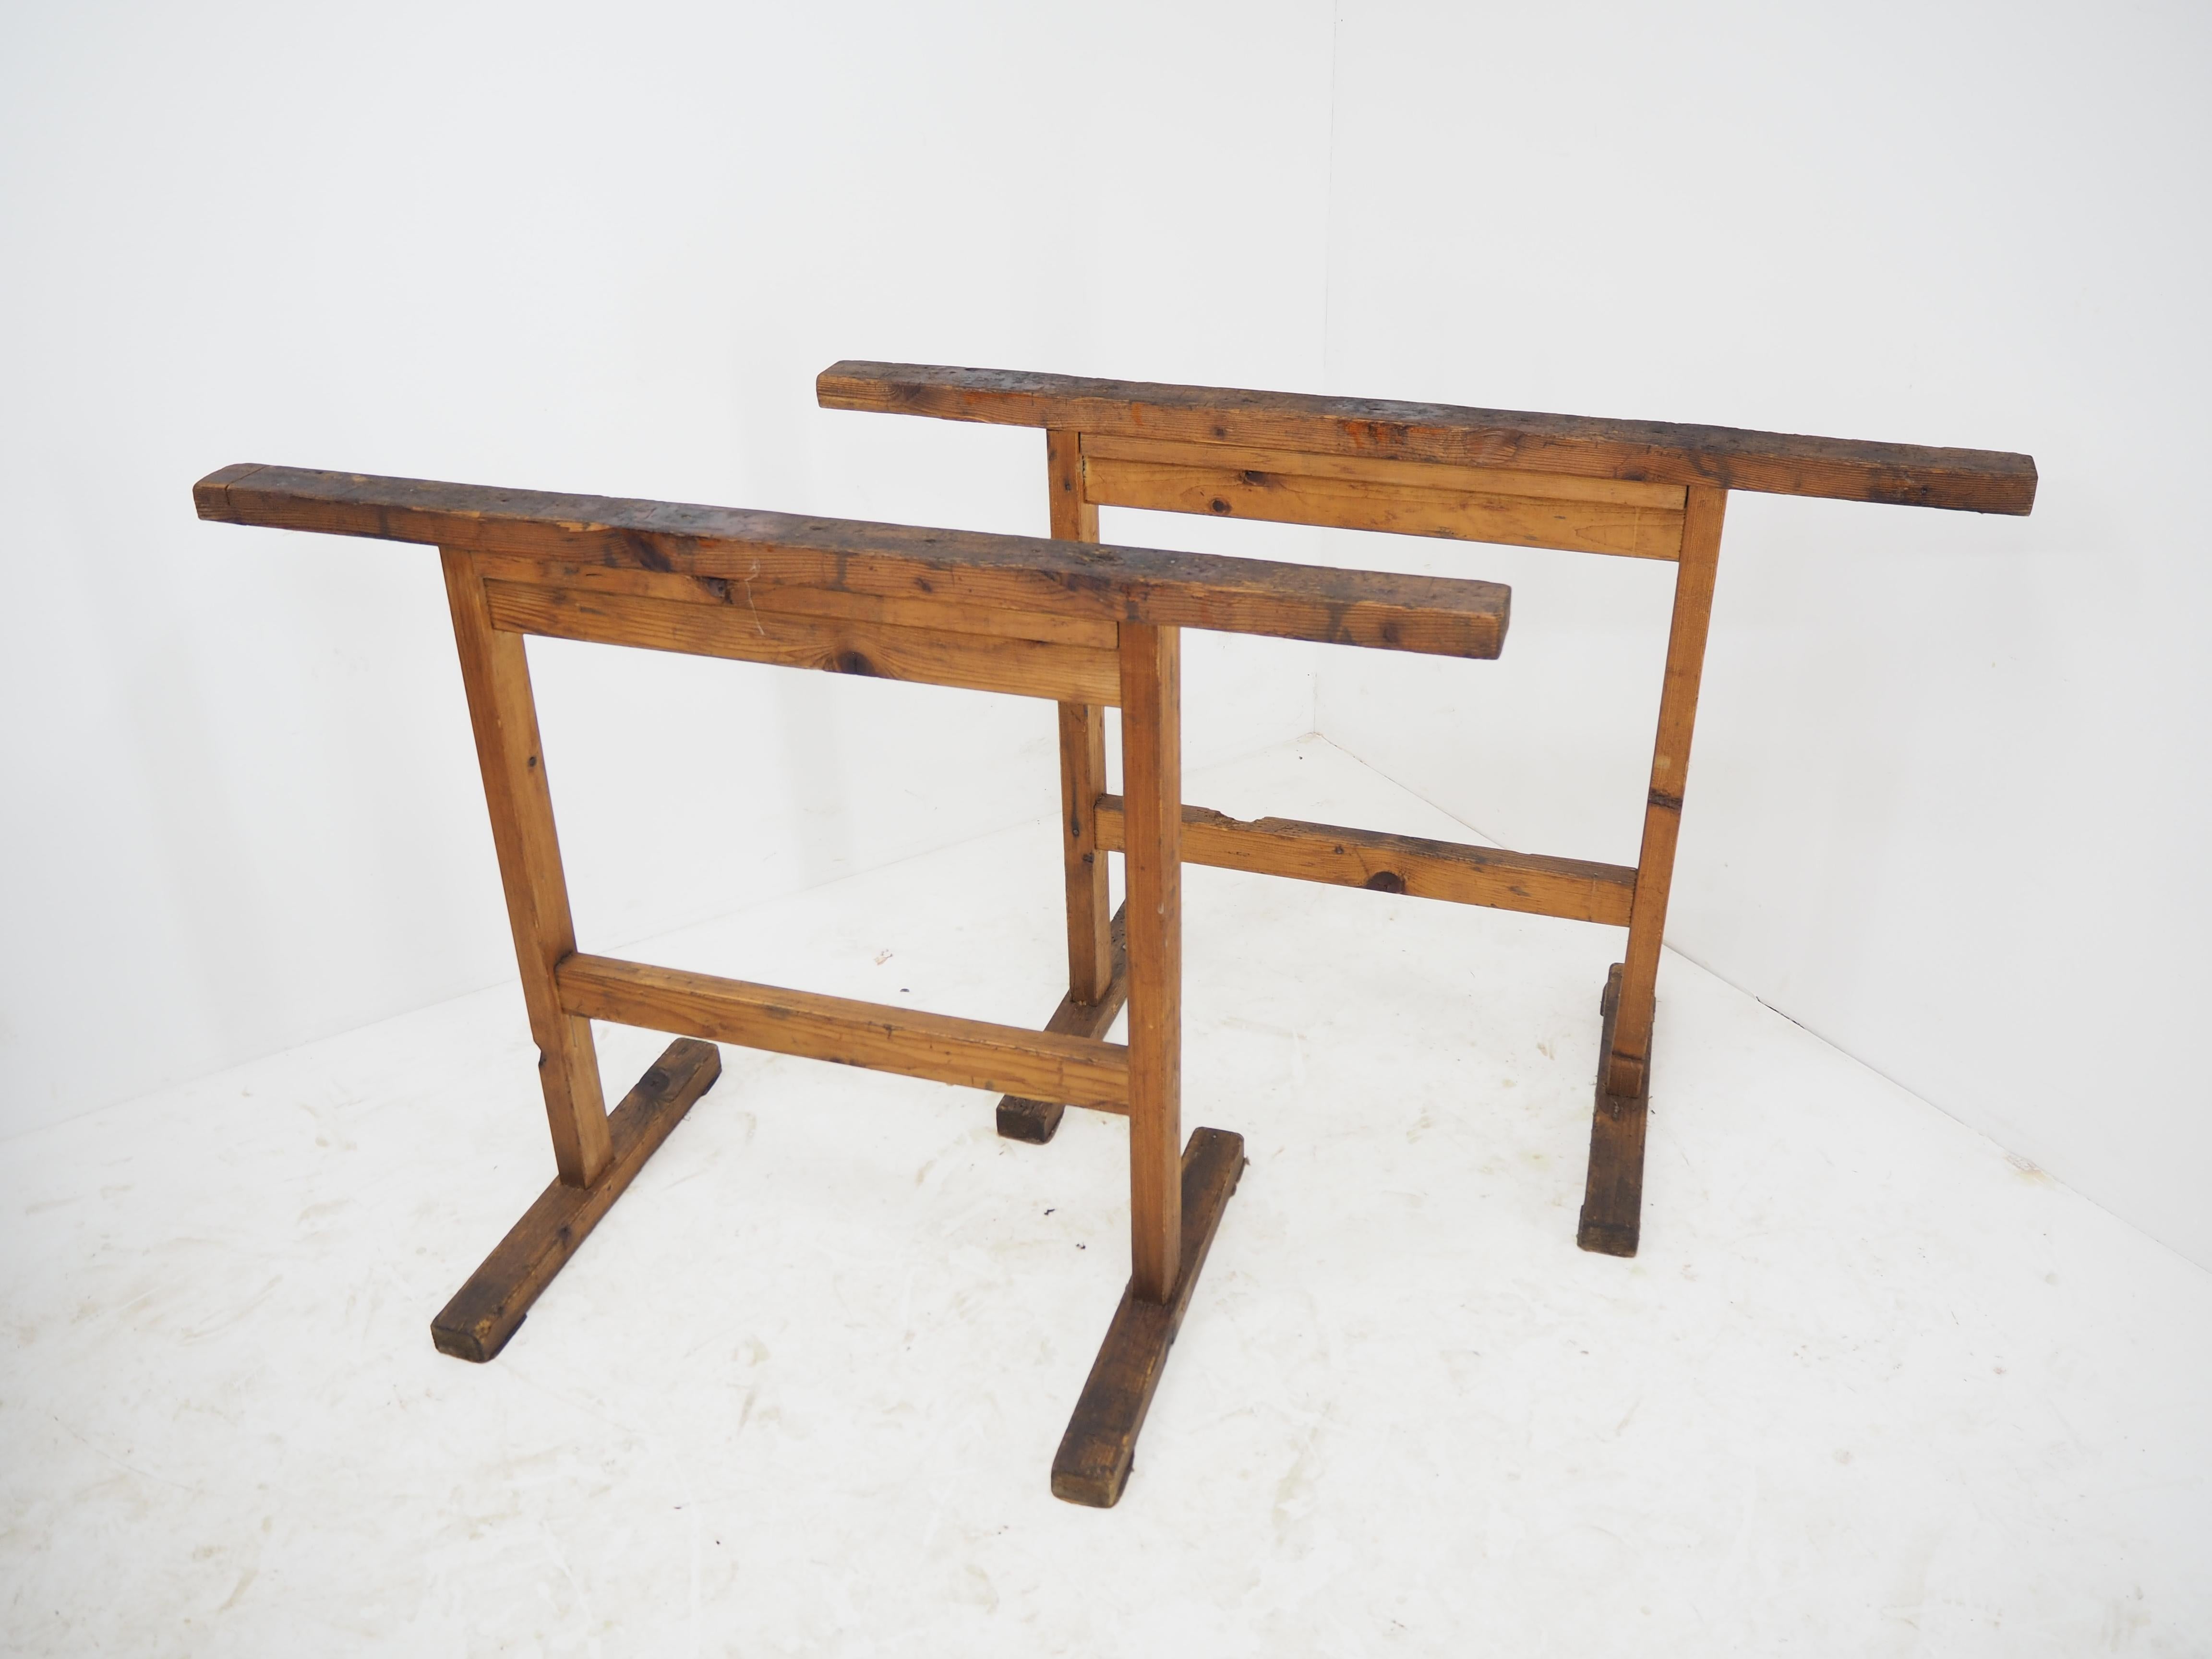 Pair of Industrial Wood Trestle Table Bases, Early 20th Century For Sale 3